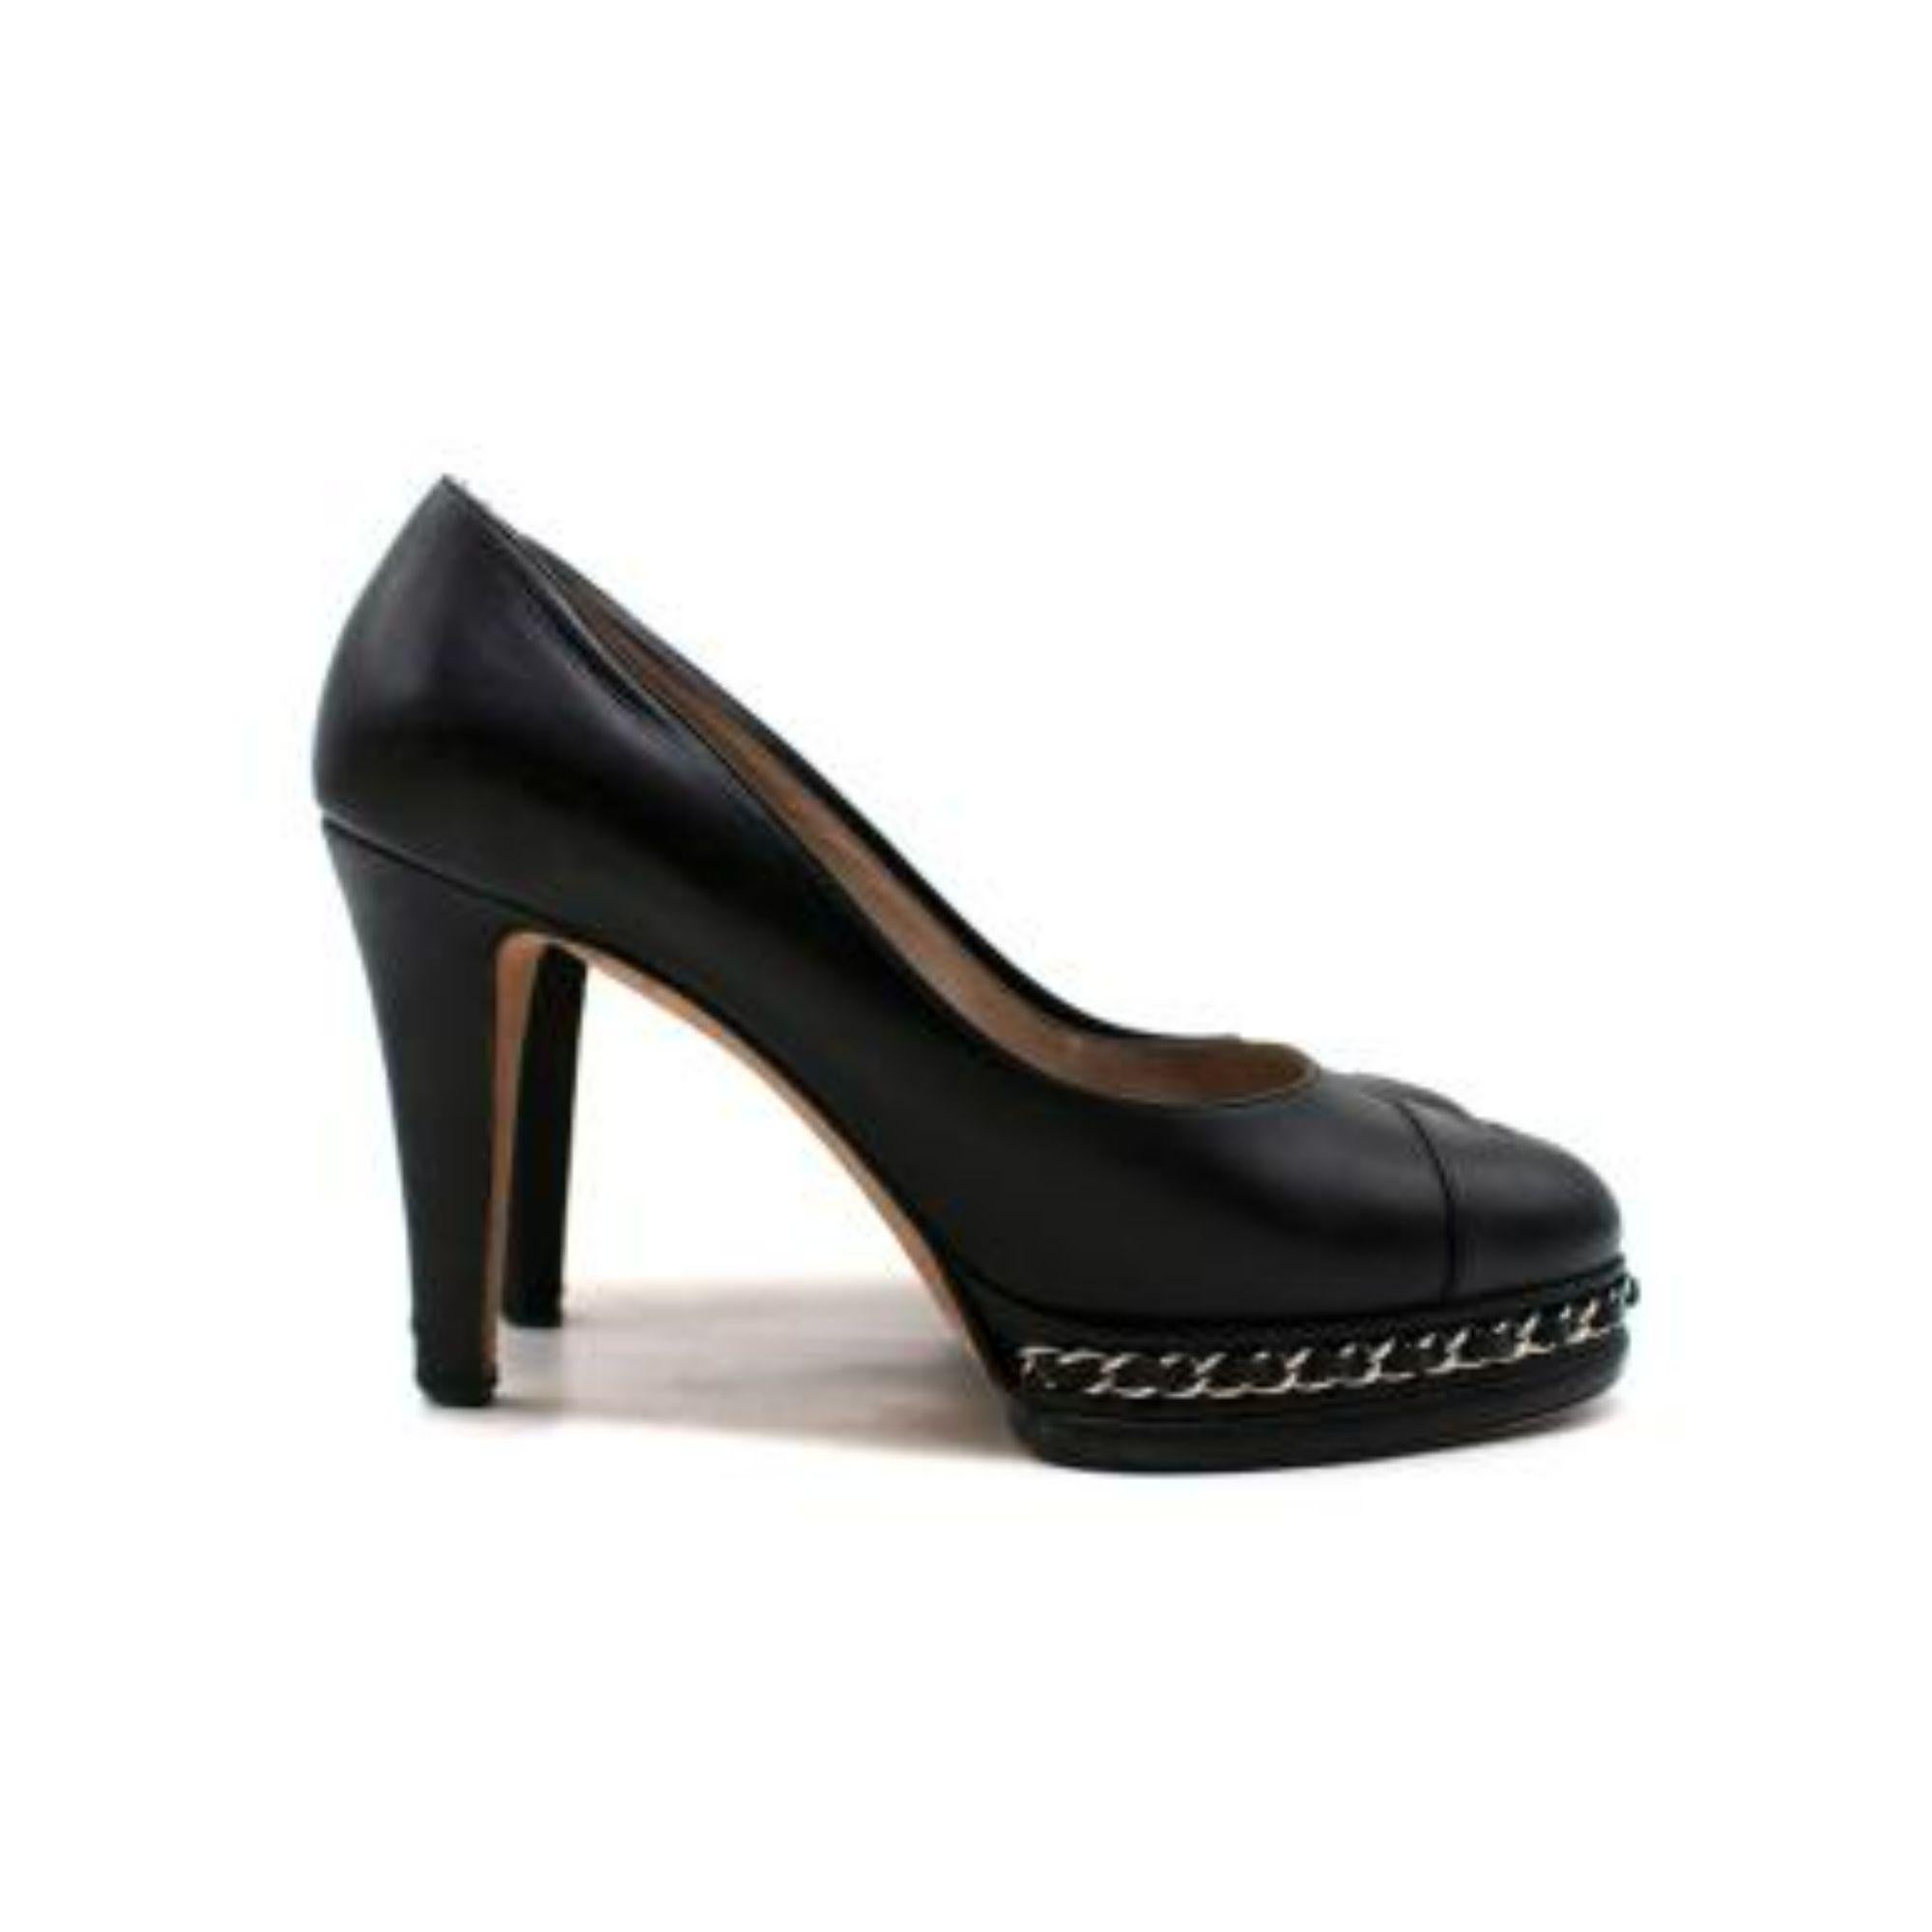 Chanel Black Chain Trimmed CC Pumps

-Chain detail on the platform 
-Branded leather insoles 
-Block heel 
-Round toe 

Material: 

Leather 

9.0/ Good conditions, some tear to the leather on the heel, please refer to images for further details.